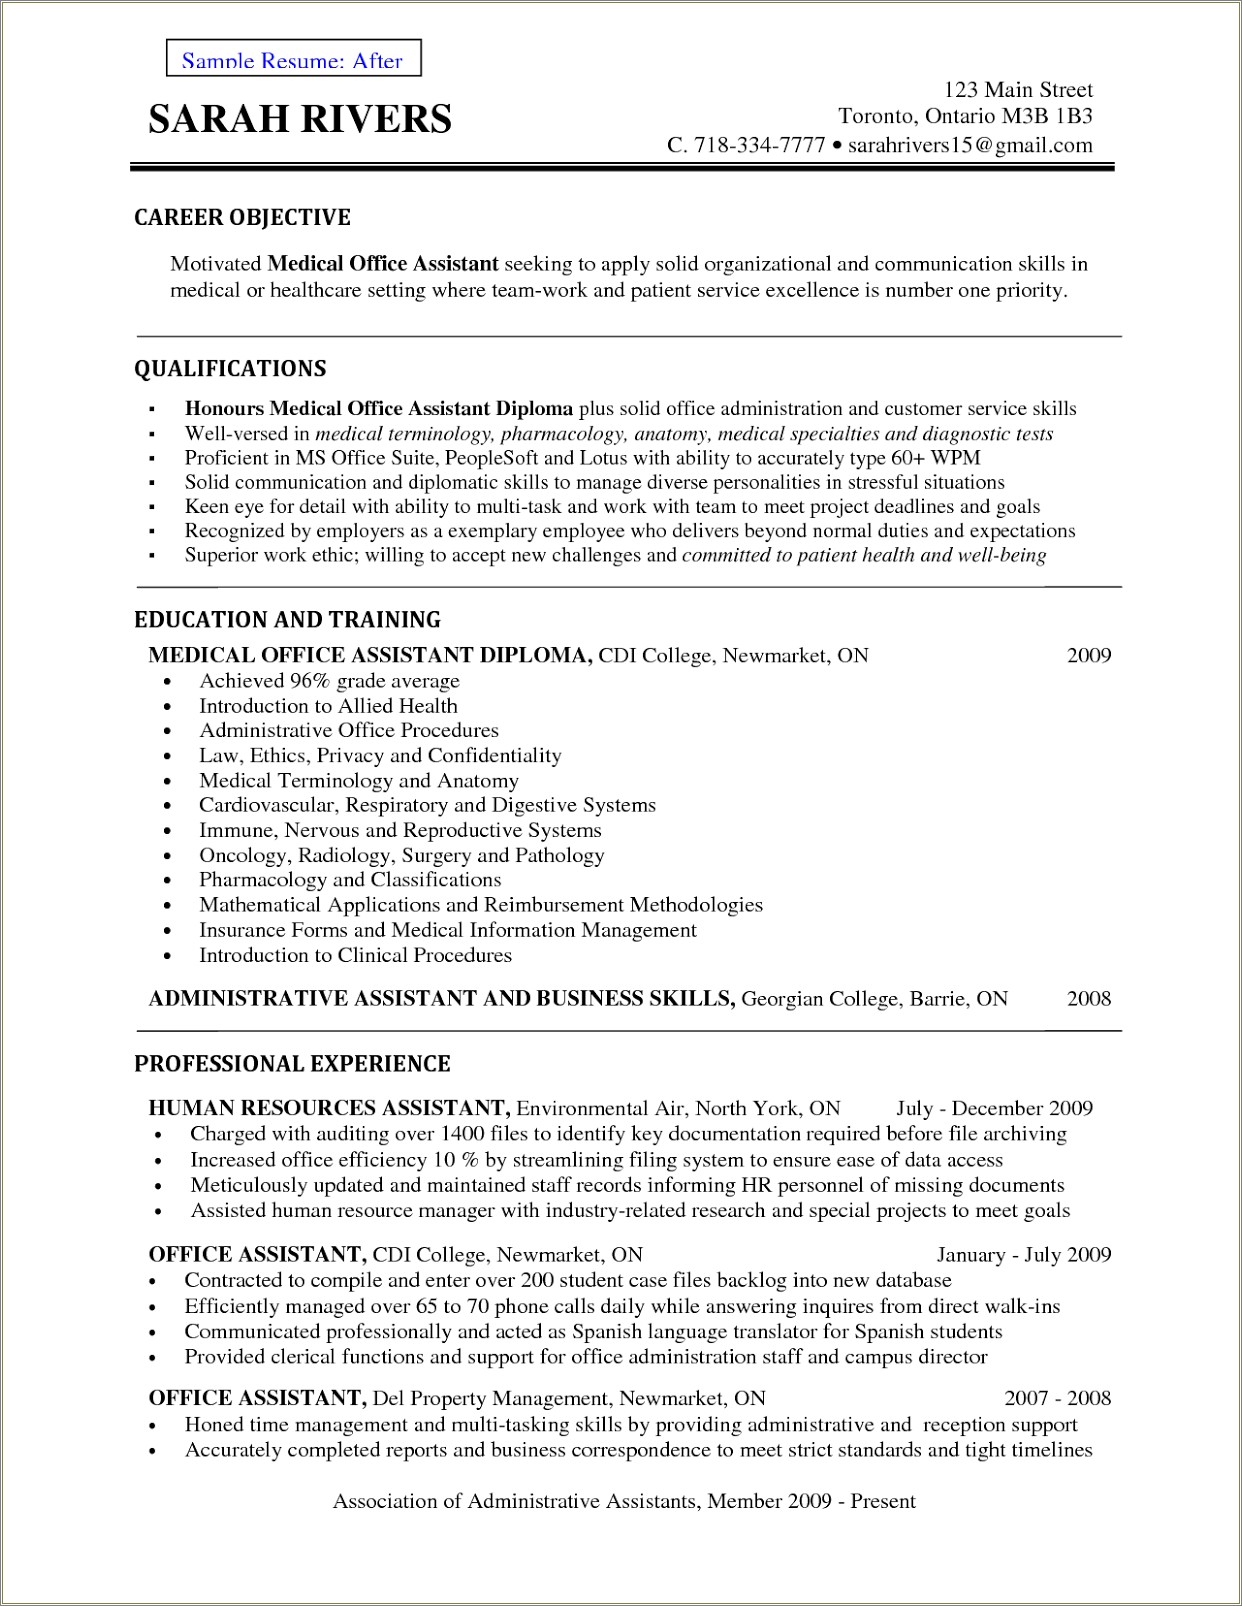 Basic Objective On A Resume Examples